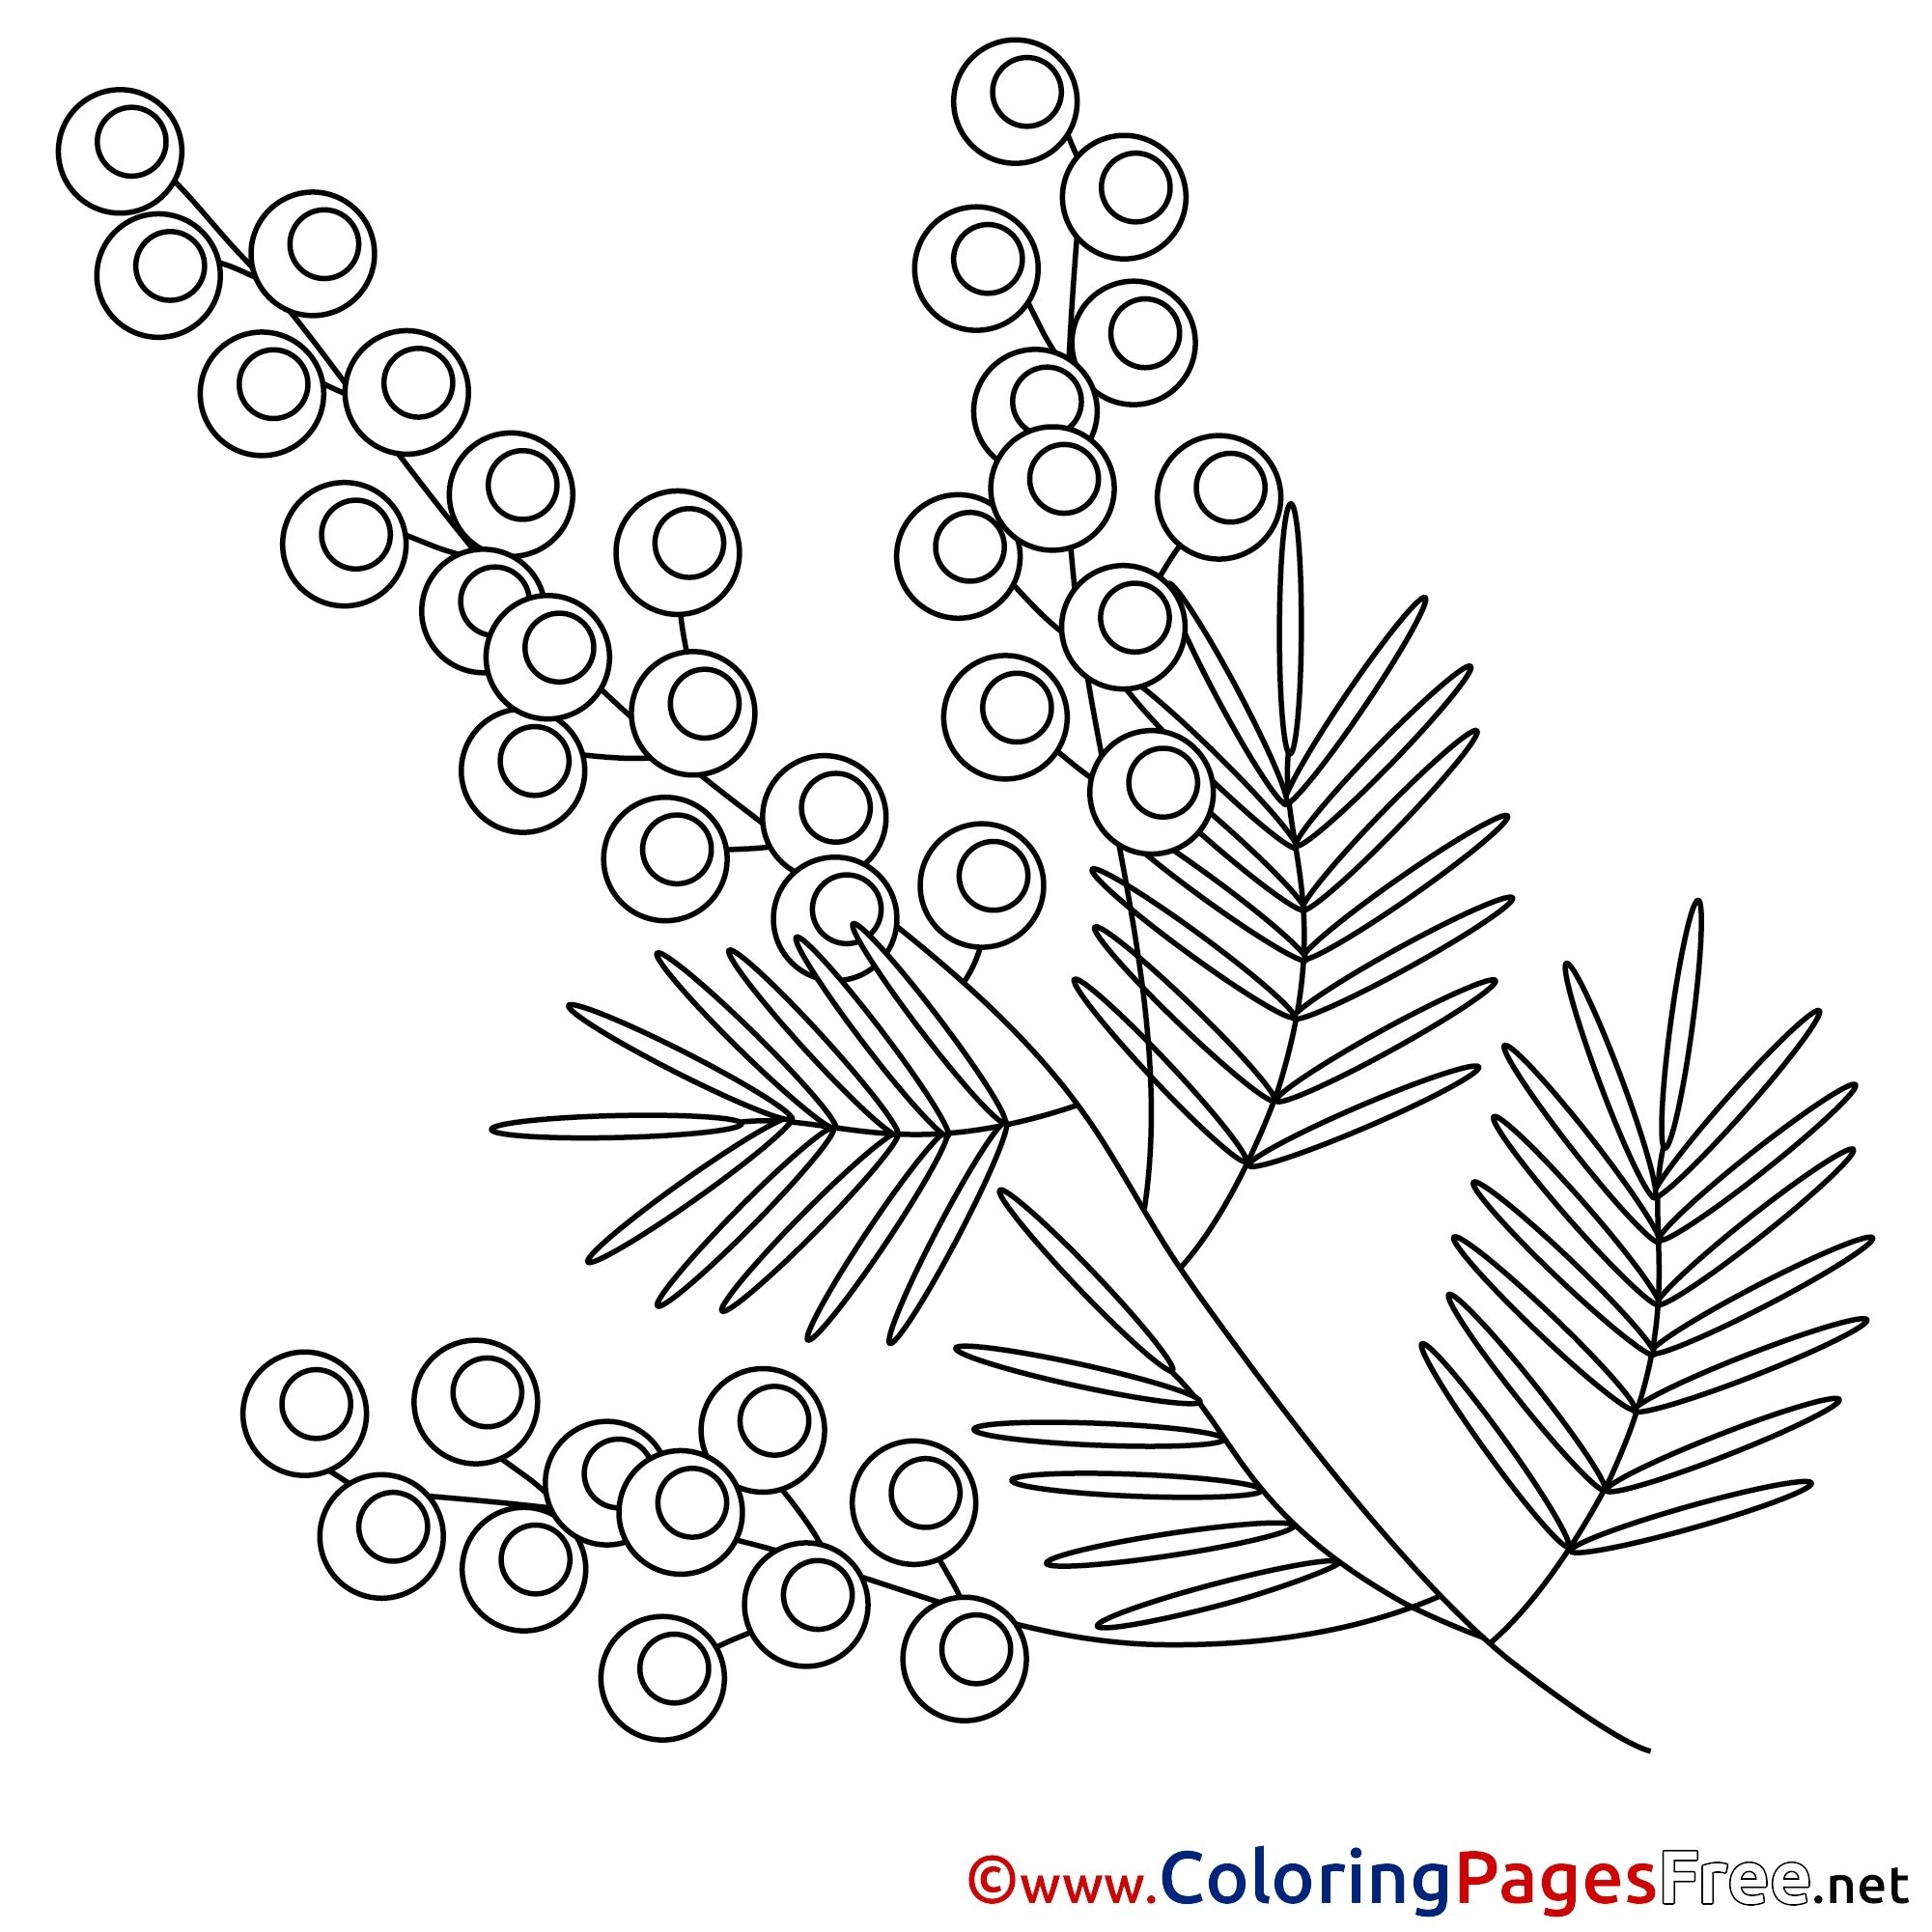 Cute mimosa coloring book for kids